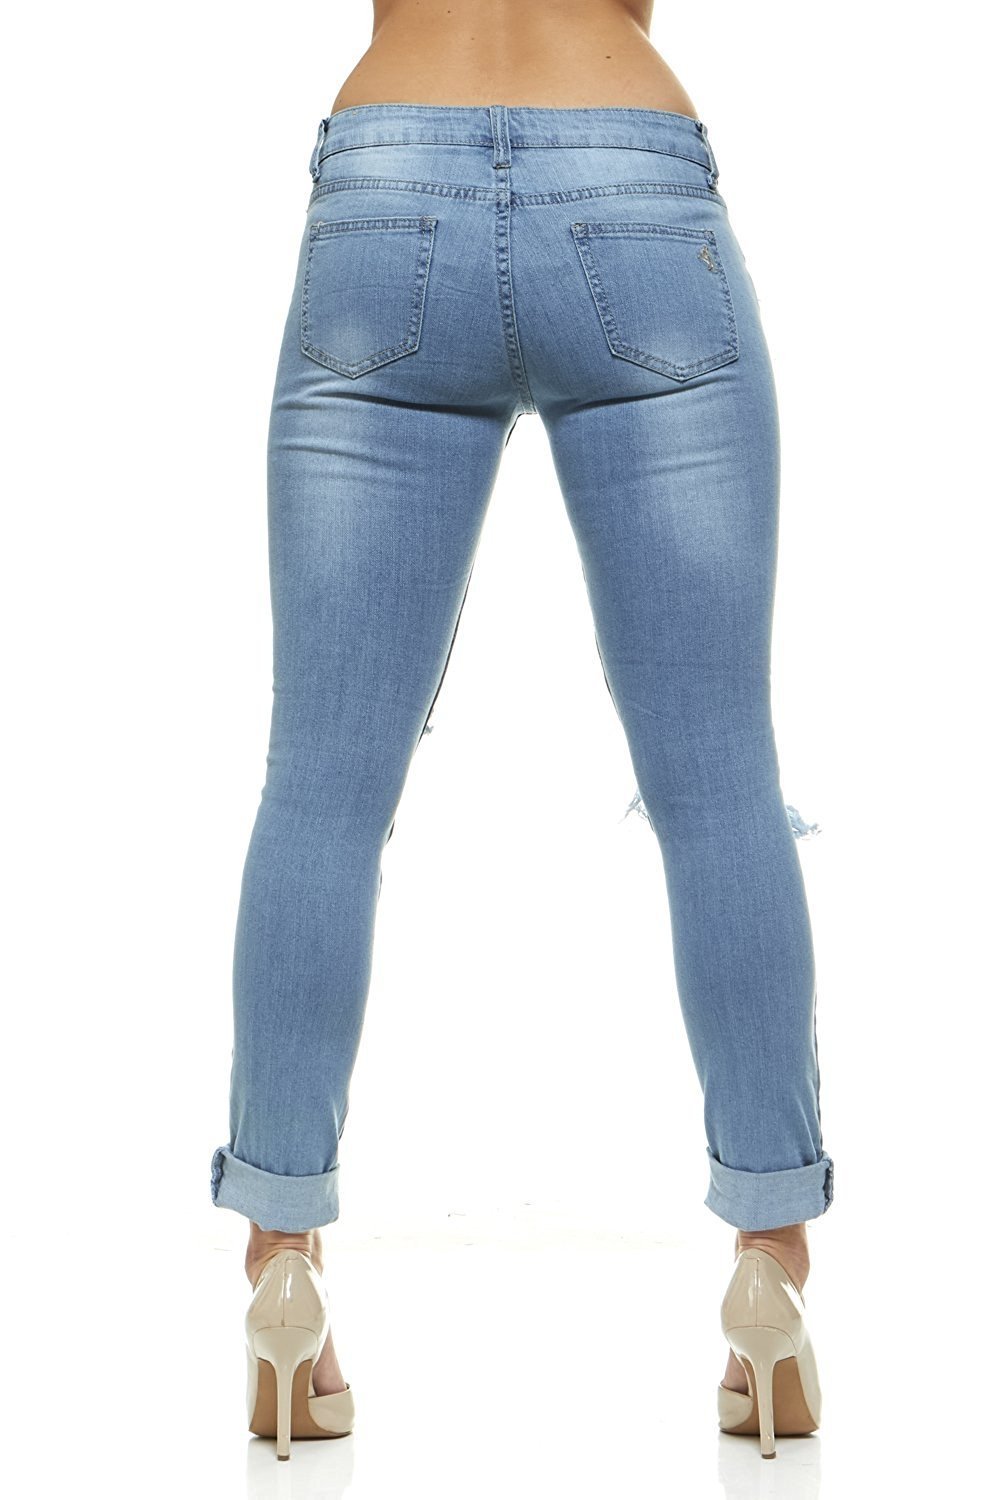 VIP JEANS Plus Size Jeans For Teen Girls Distressed Skinny Ripped Patched Jeans Junior and Plus Sizes - image 2 of 10